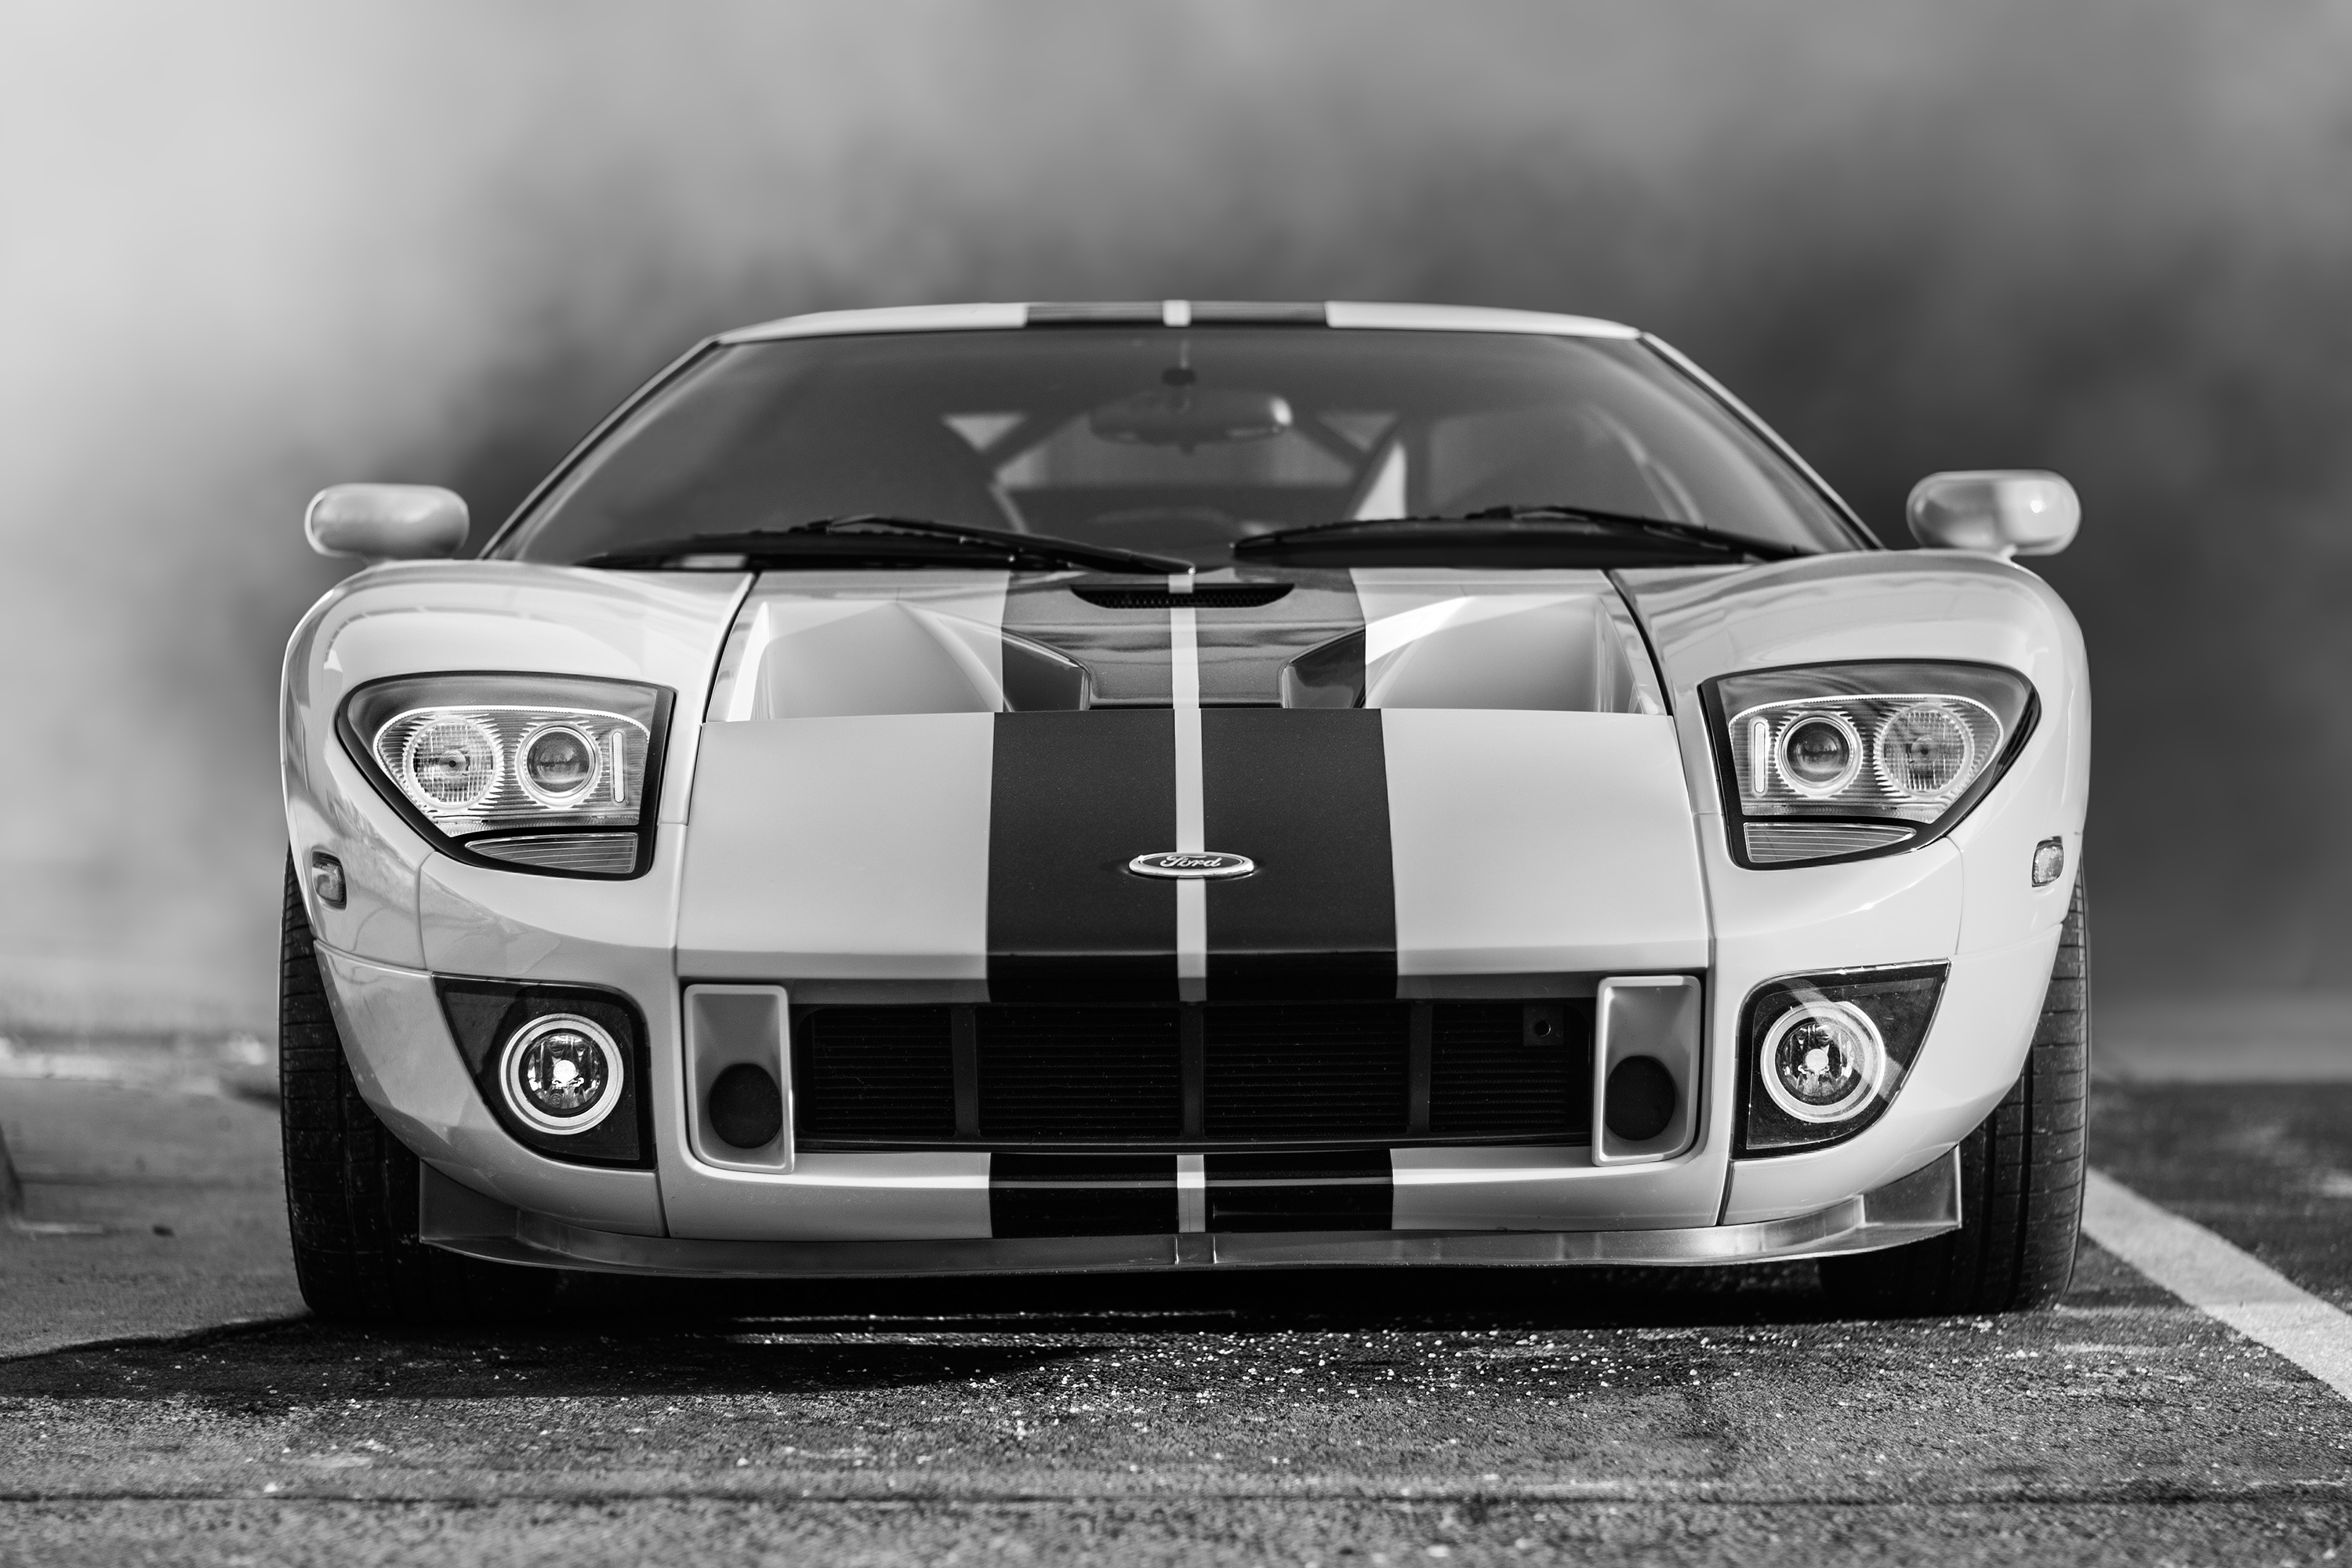 cars, chb, lights, ford, bw, headlights, ford gt images